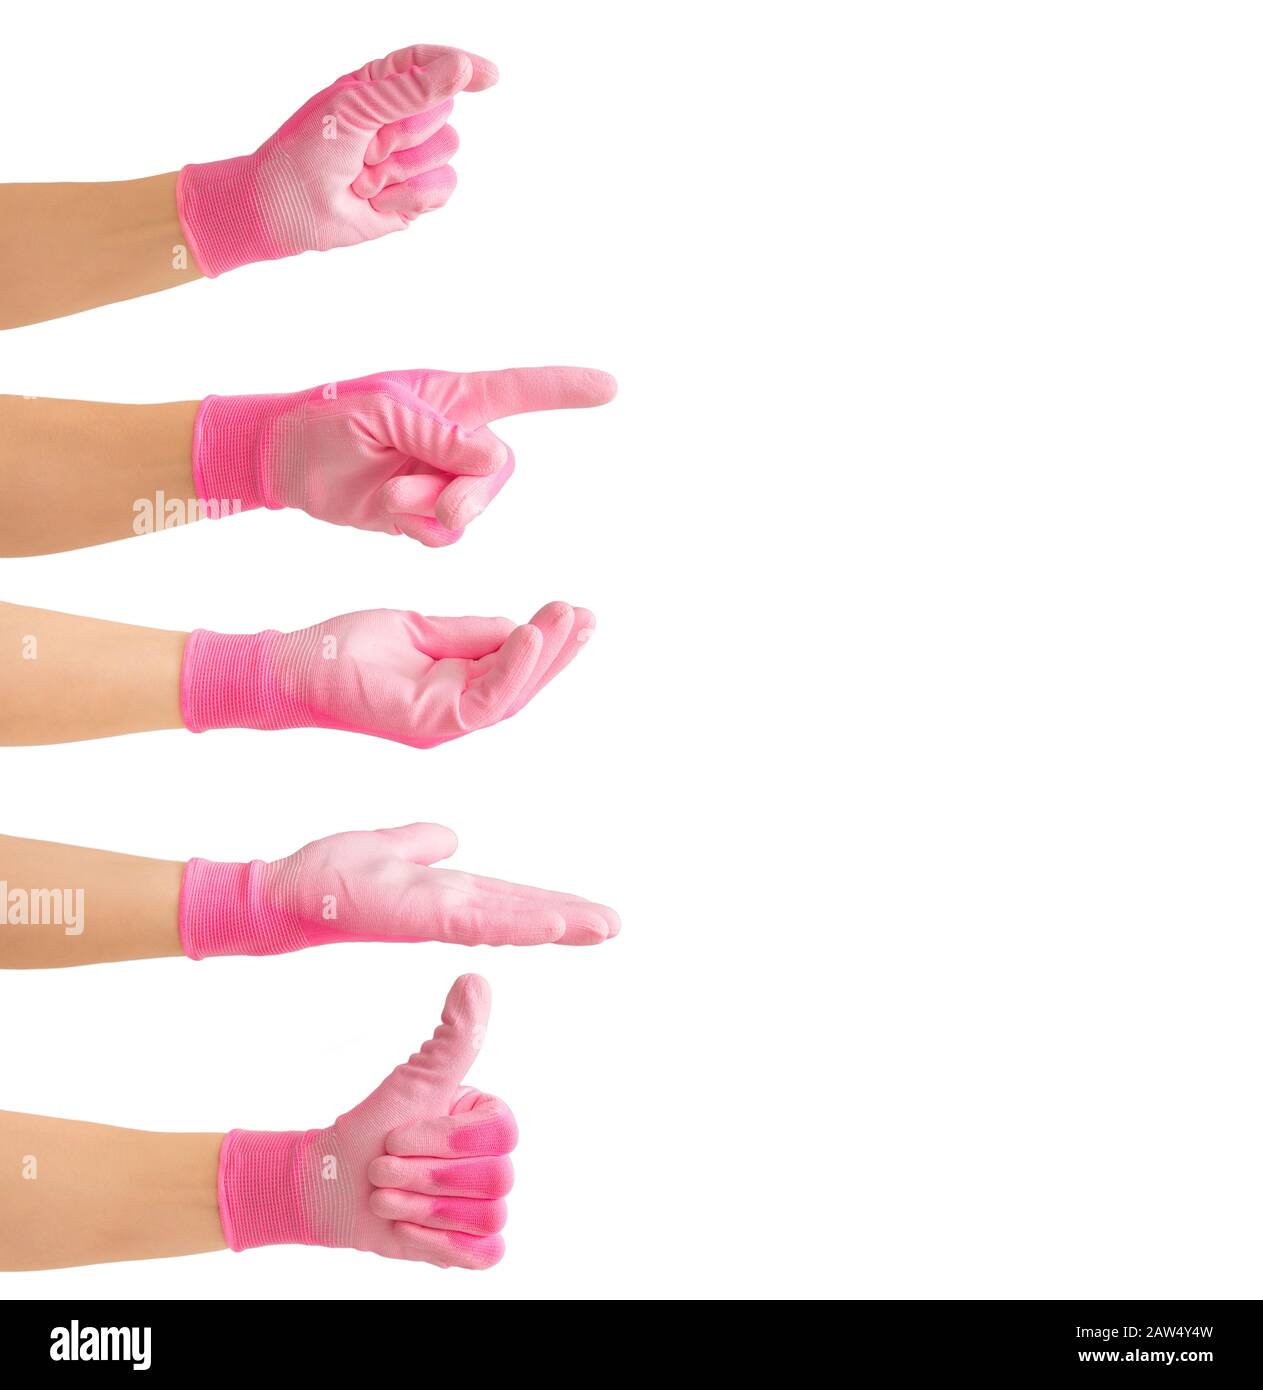 Lot of different woman hand gestures shapes with pink working glove. Thumbs up, OK, holding, finger pointing, inside palm and on palm. Ad background c Stock Photo